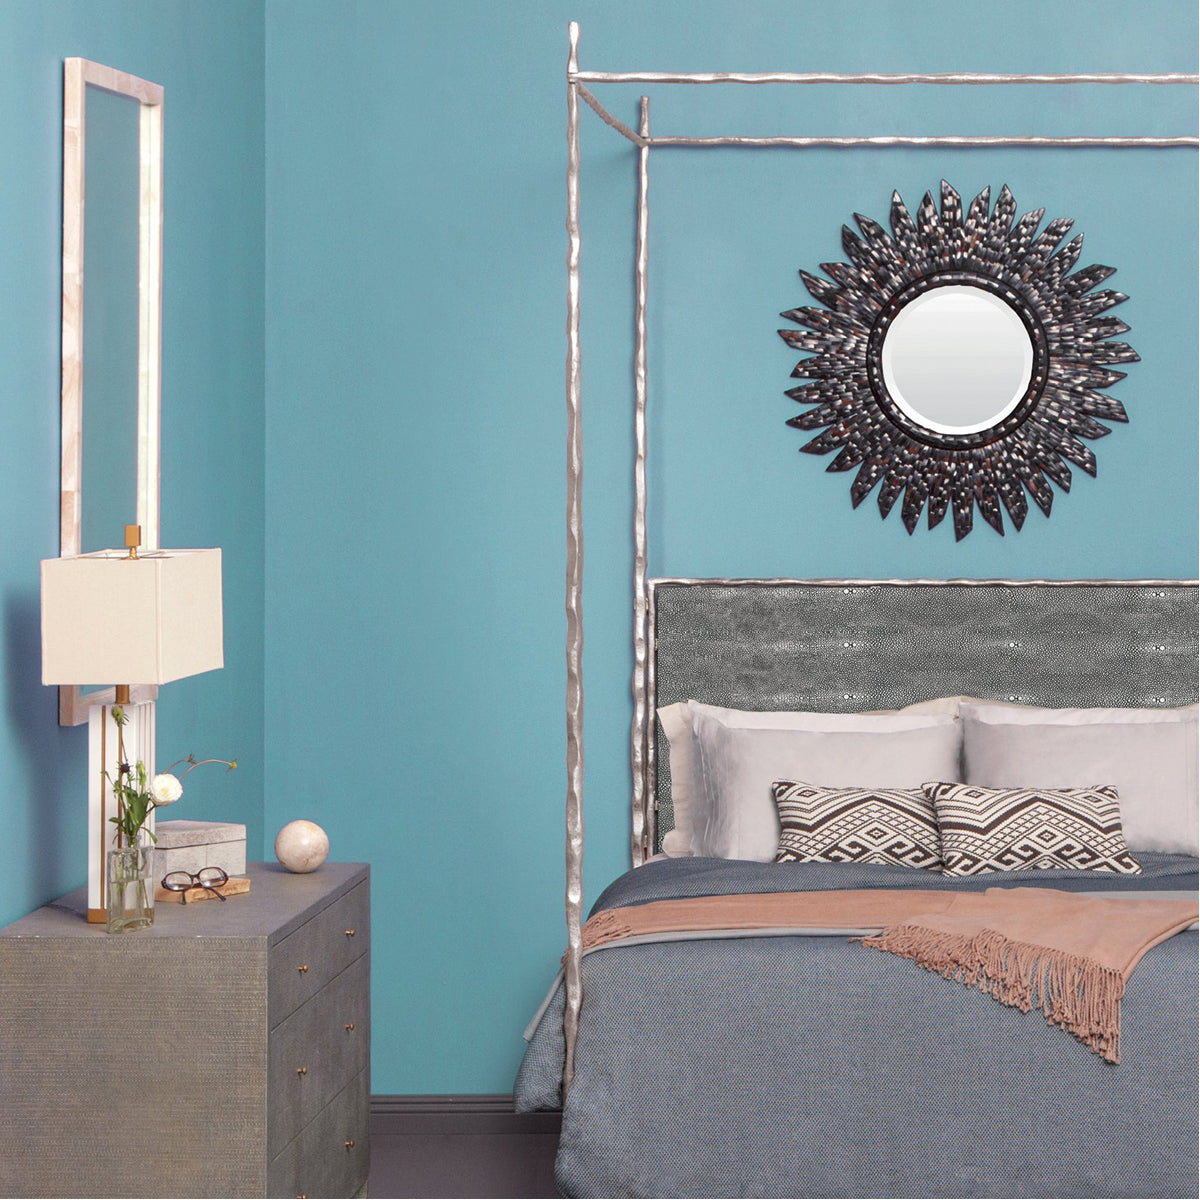 Made Goods Brennan Tall Textured Canopy Bed in Danube Fabric